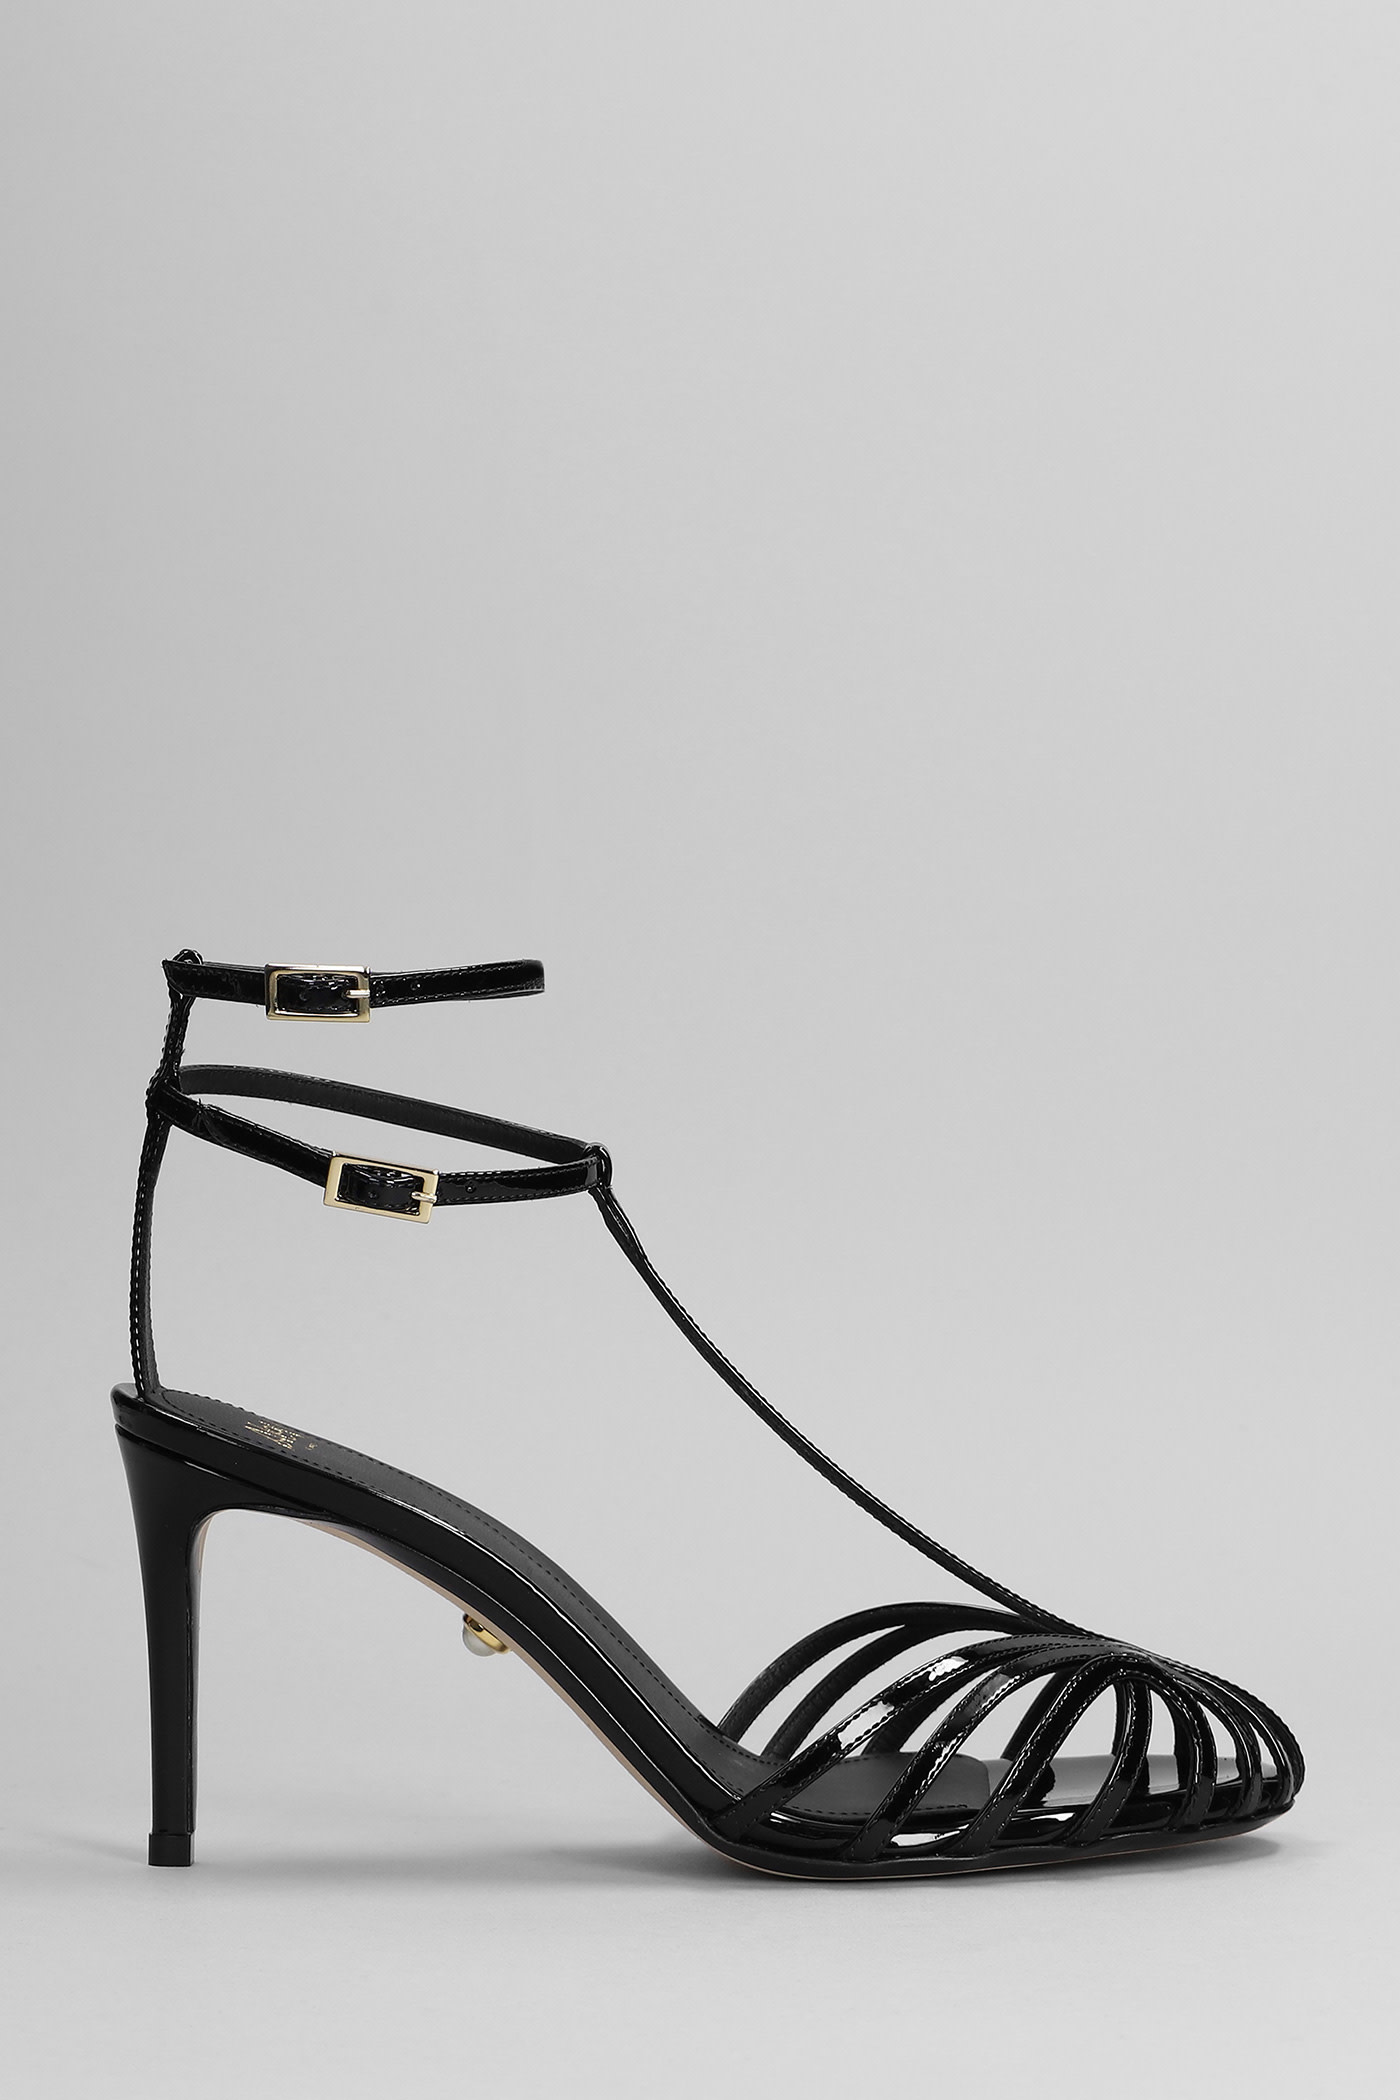 ALEVÌ ANNA 80 SANDALS IN BLACK PATENT LEATHER